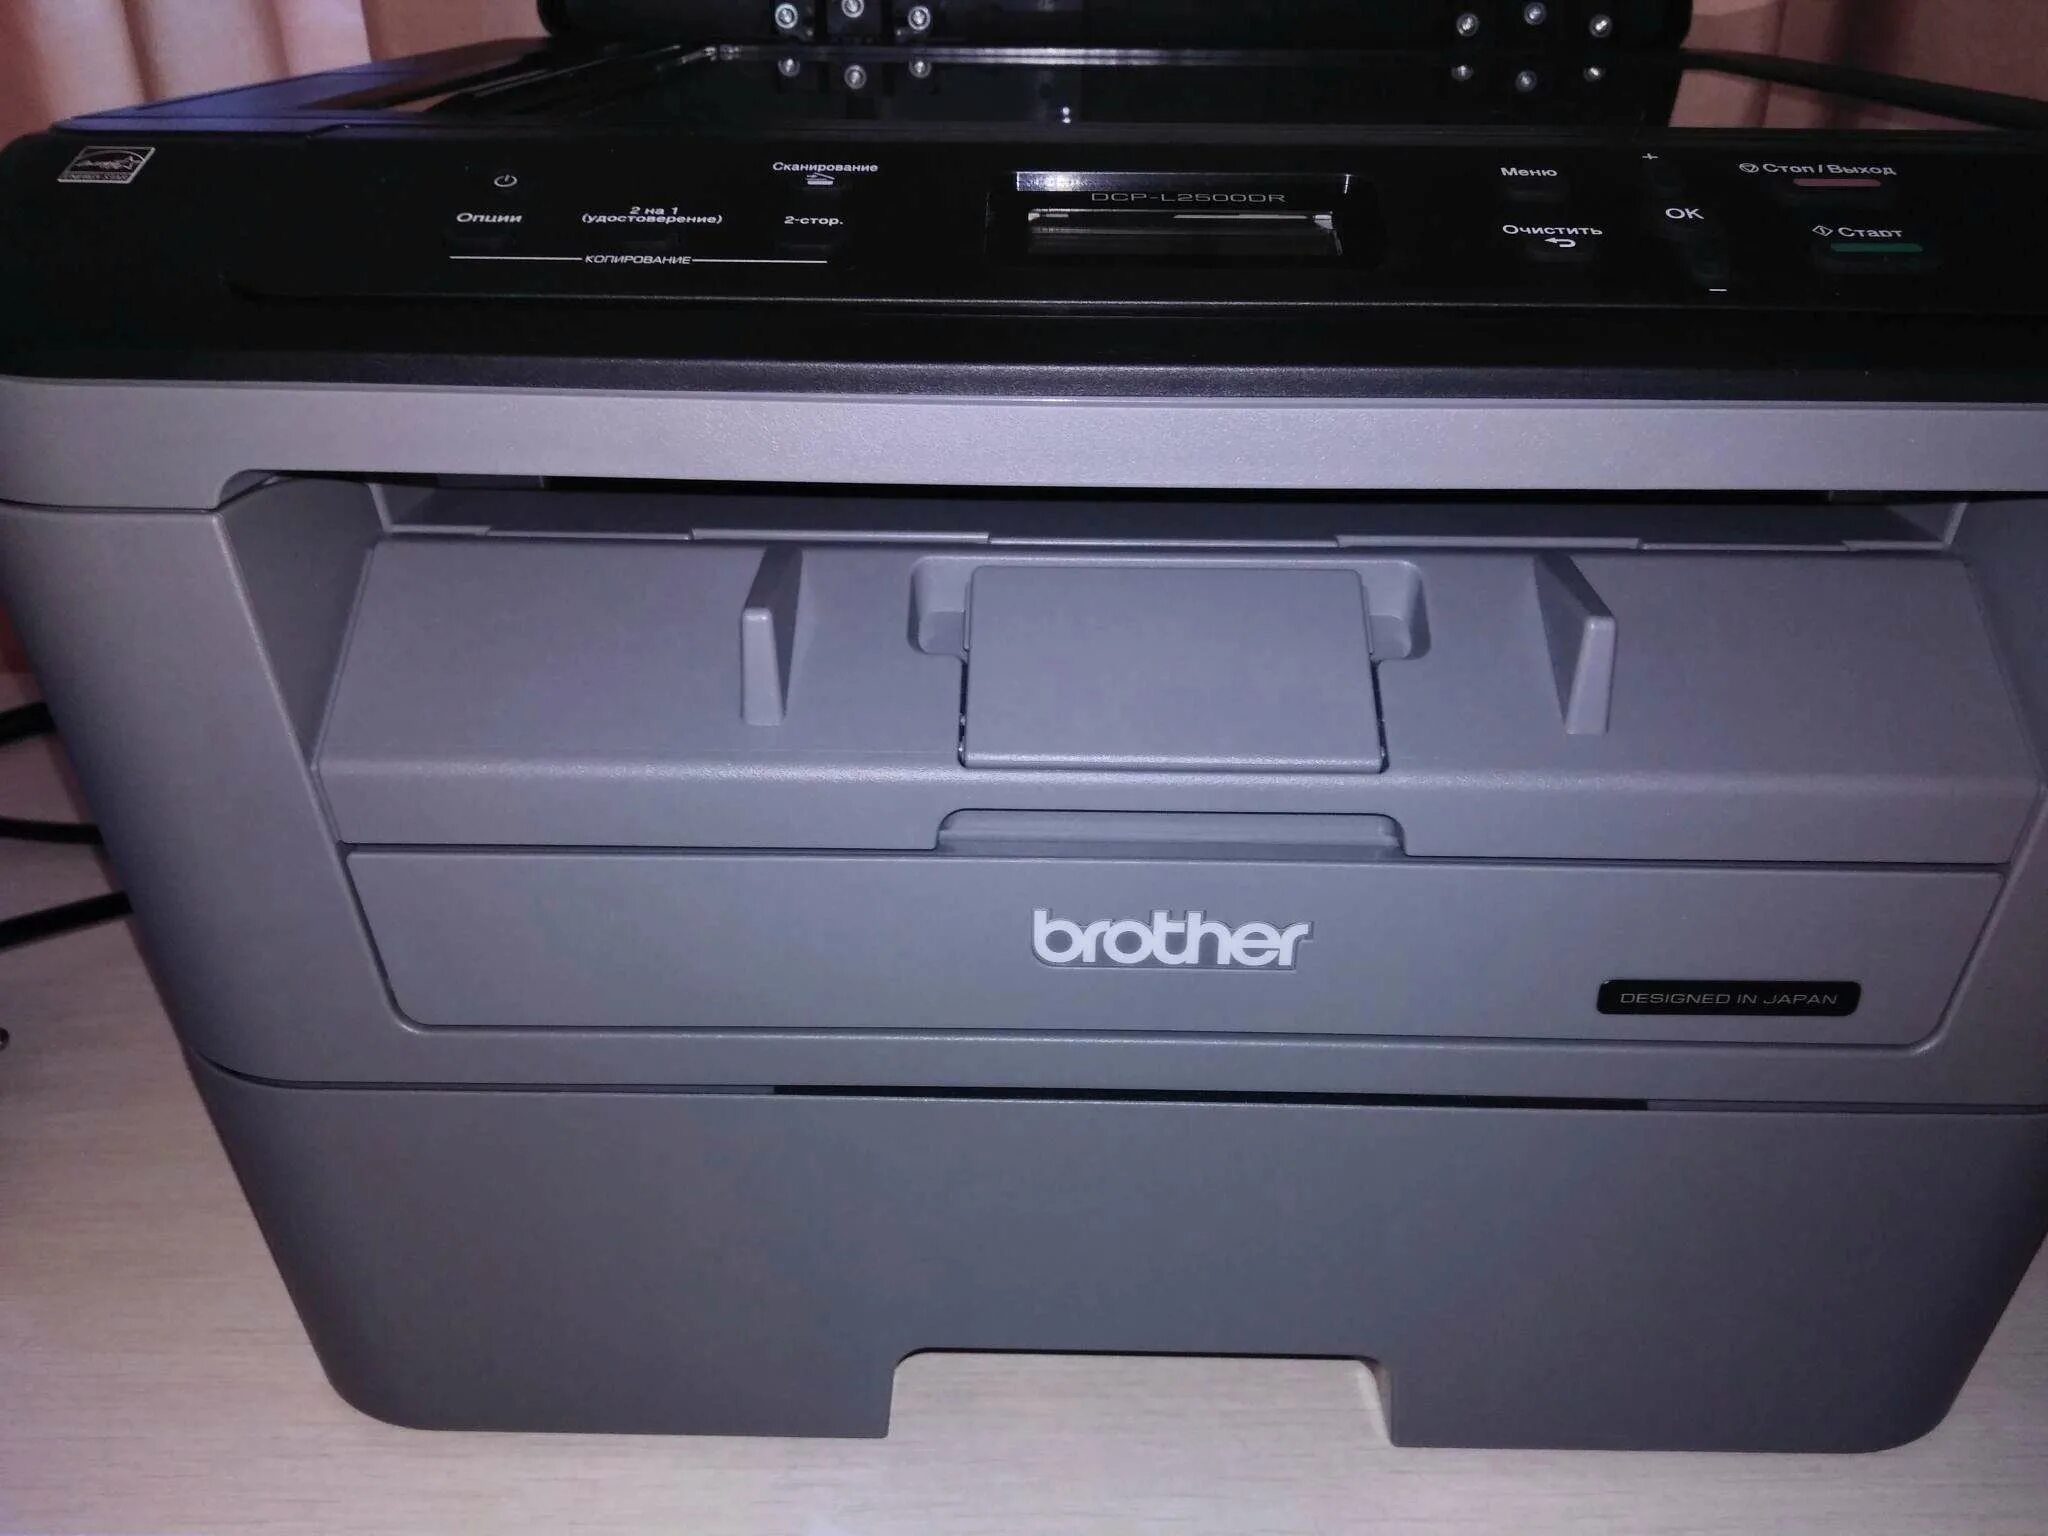 Бразер 2500. МФУ brother DCP-l2500dr. Принтер brother DCP l2500dr. Brother DCP 2500. Brother DCP 2500dr.